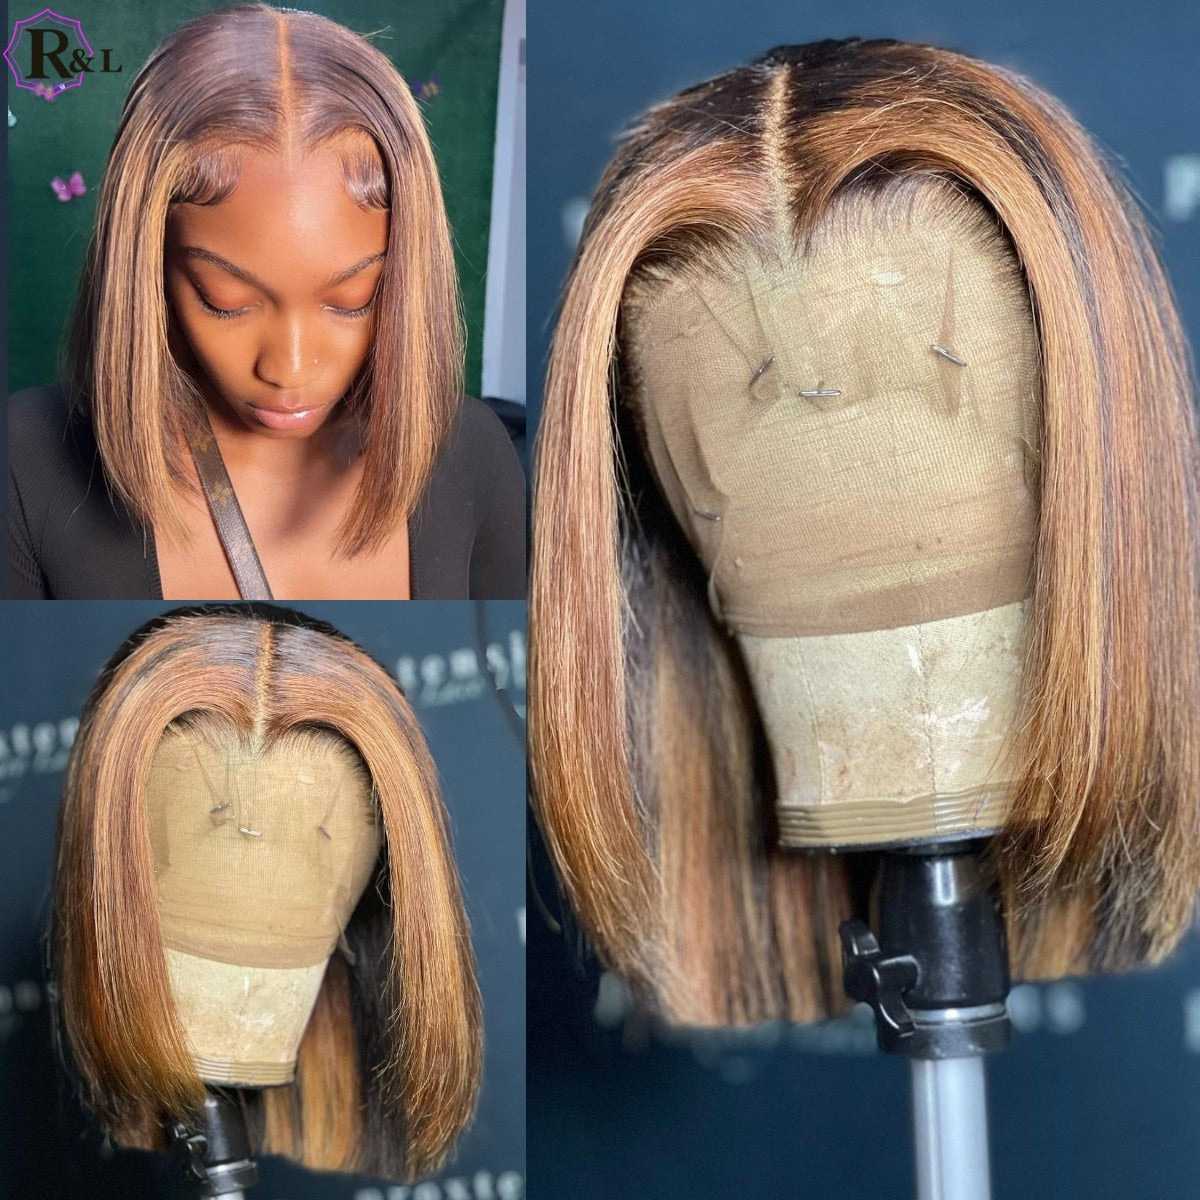 RULINDA Highlight Ombre Colored Bob Short Human Hair Wigs Straight Hair 13X4 Lace Front Wigs Glueless Brazilian Remy Hair